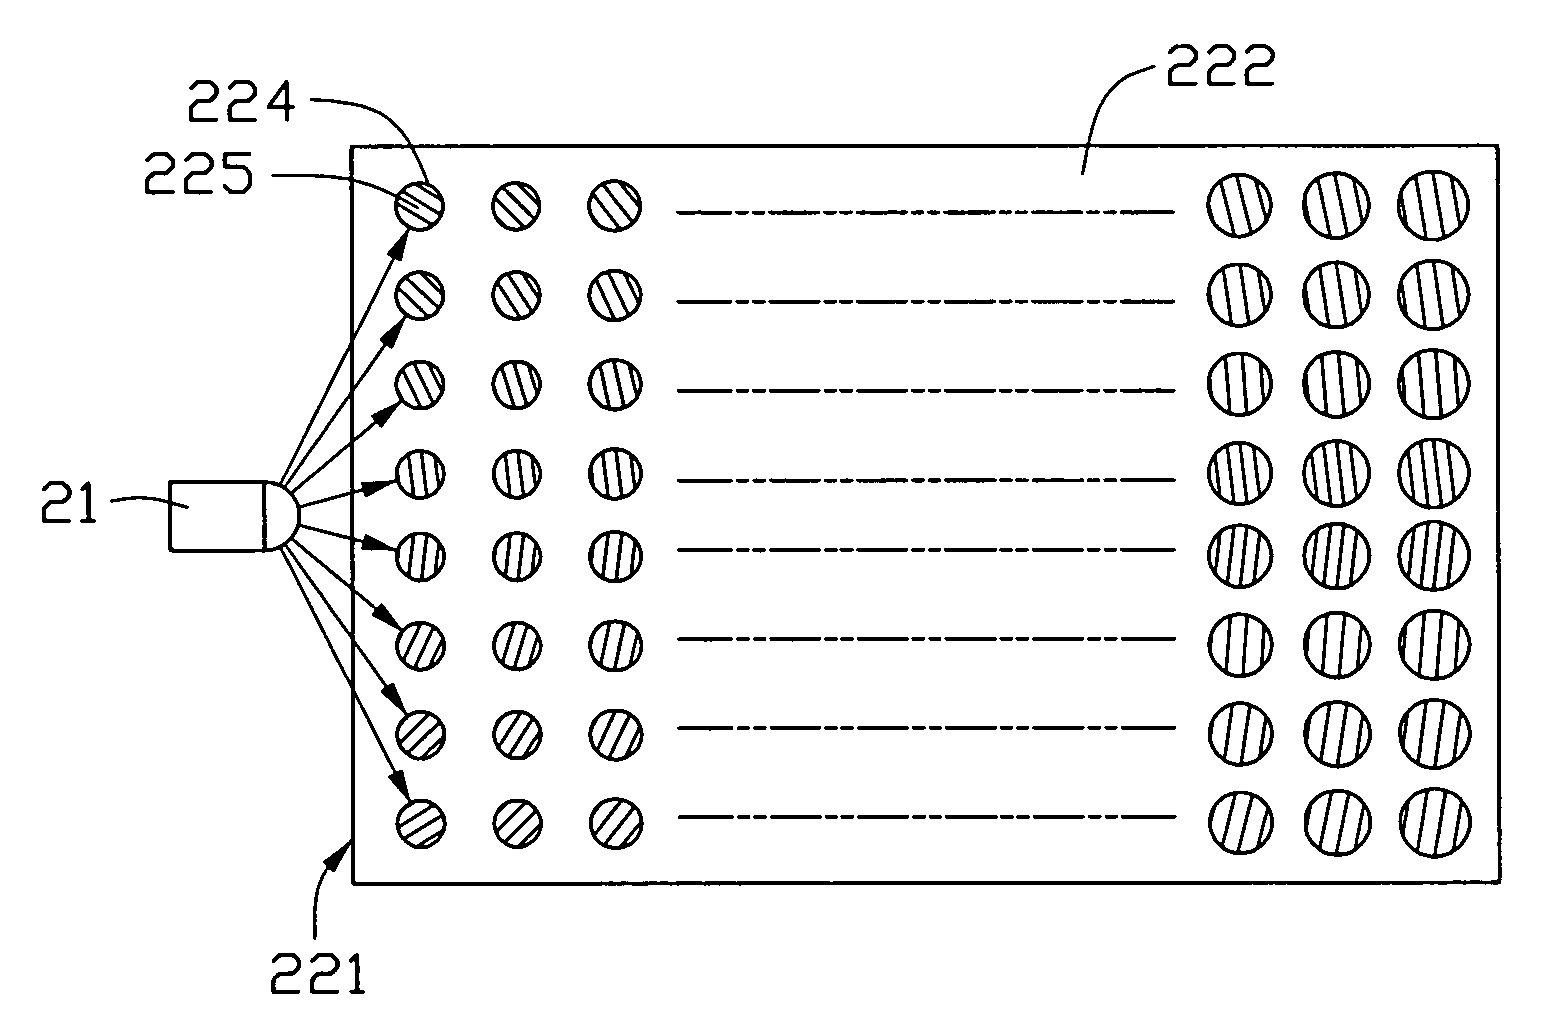 Light guide plate with diffraction gratings and backlight module using the same